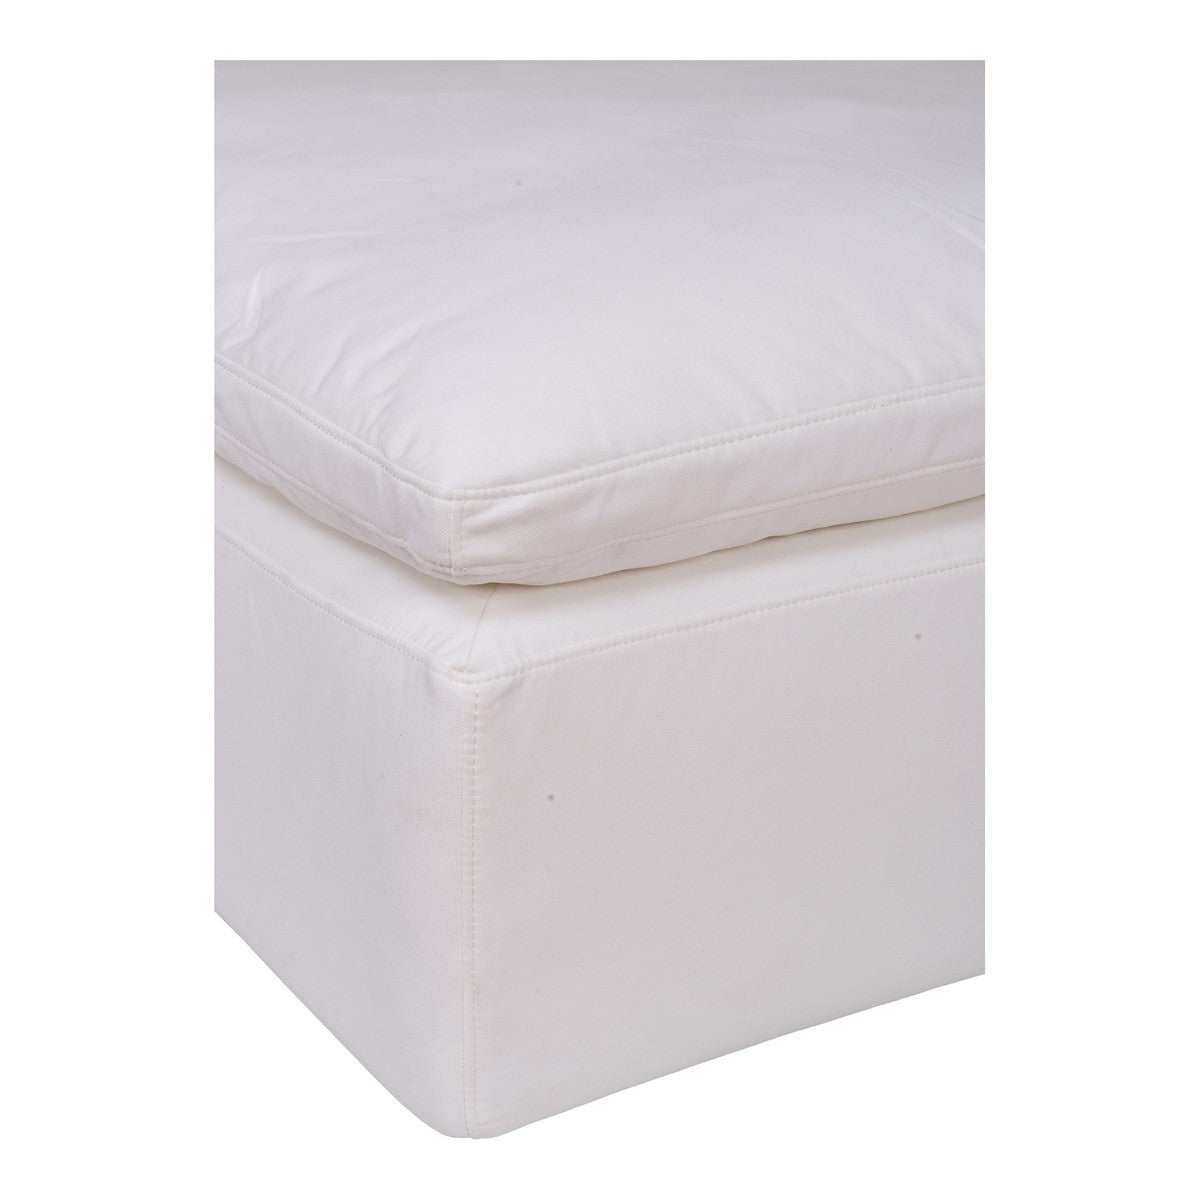 Moe's Home Collection Clay Ottoman Livesmart Fabric Cream - YJ-1002-05